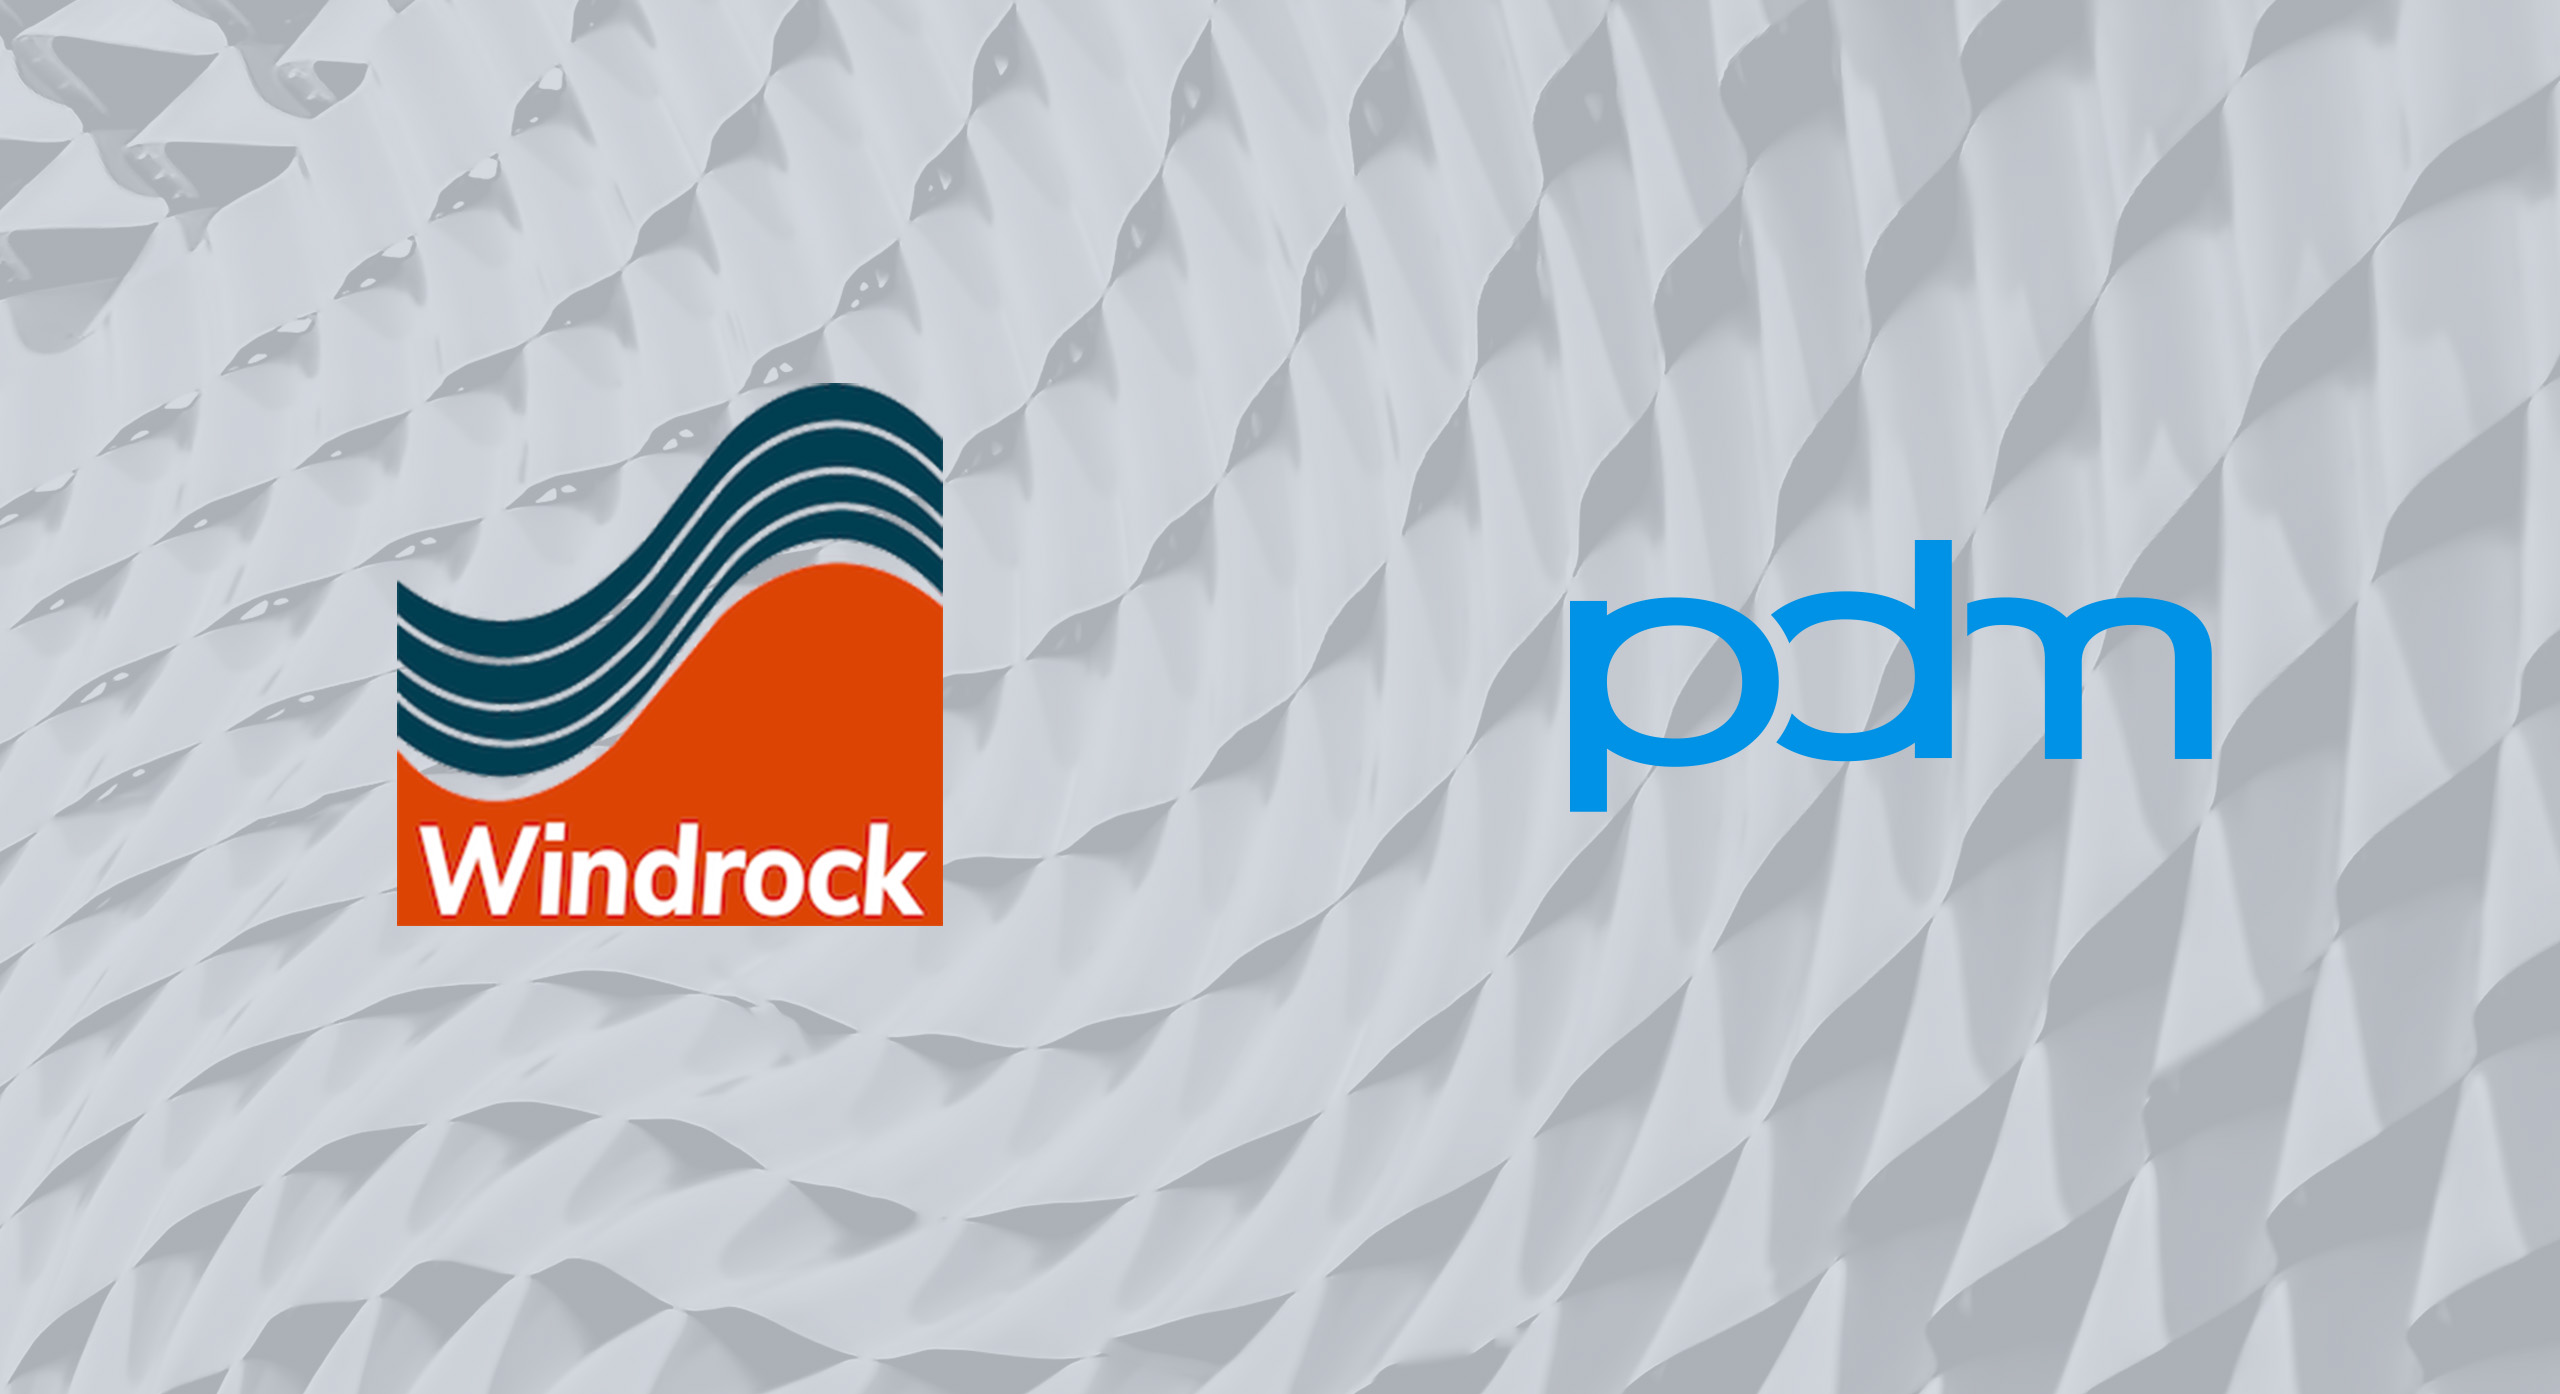 Windrock logo and PDM Technologies Inc. logo on a textured light background